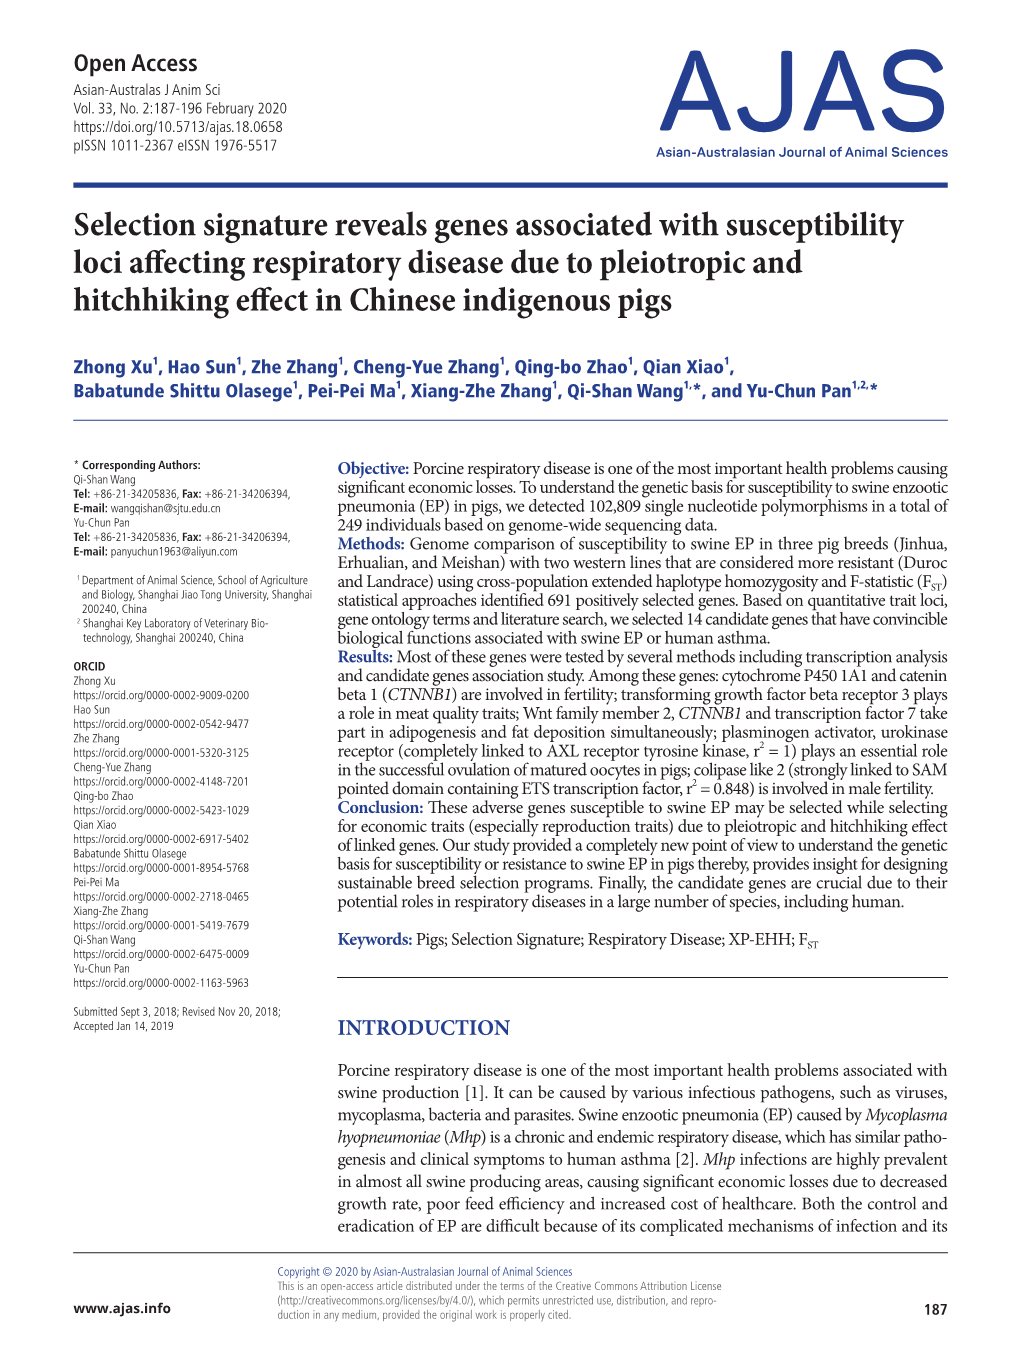 Selection Signature Reveals Genes Associated with Susceptibility Loci